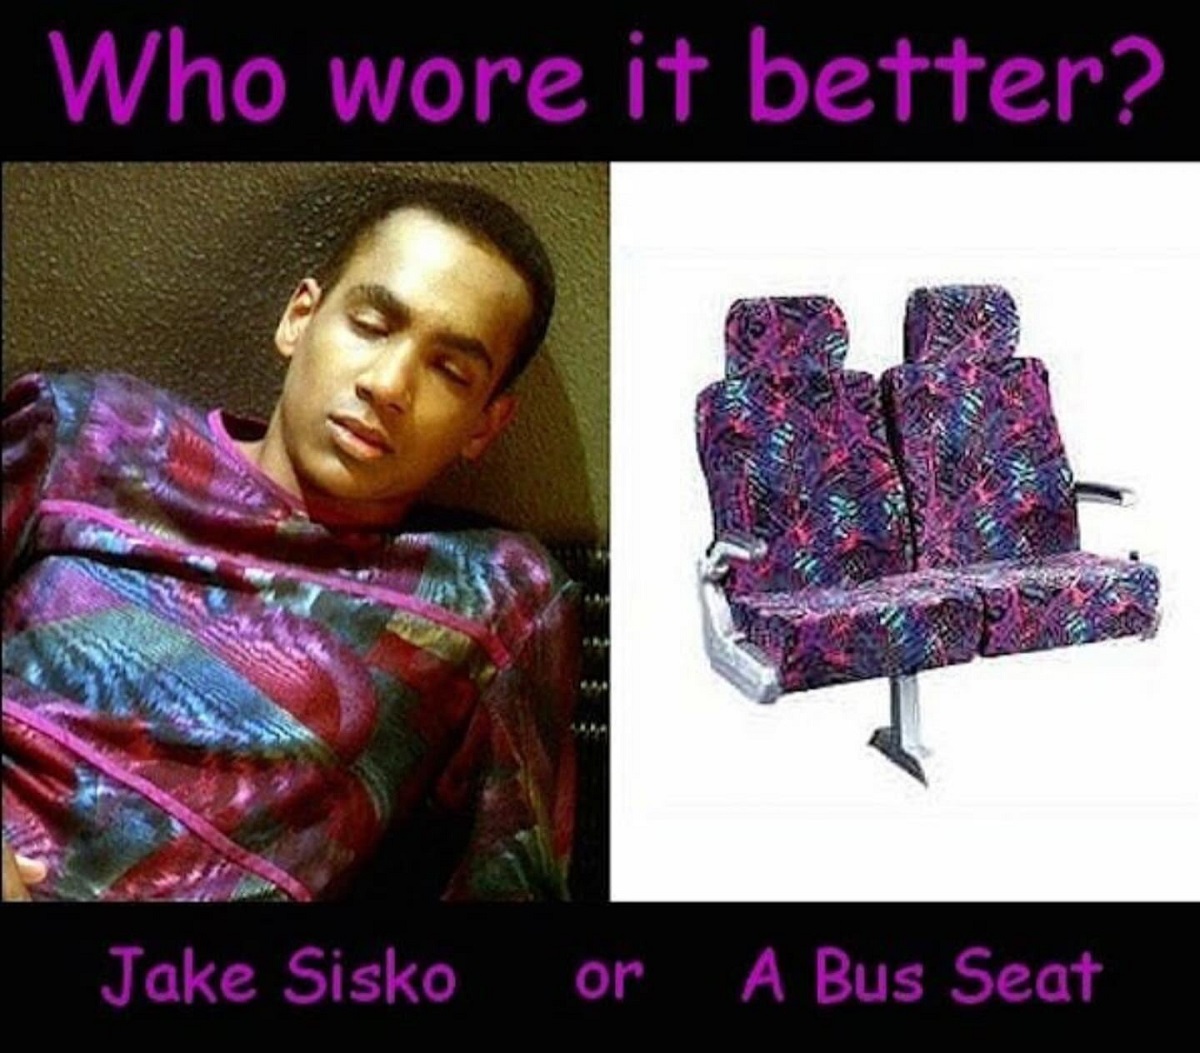 A meme featuring Jake Sisko from Star Trek Deep Space Nine. The top reads "Who wore it better?" then we see Jake Sisko (Black teen boy) in a purple patterned shirt on the left, and on the right is a picture of bus seats with a similar purple pattern. Under the photos it reads "Jake Sisko or A Bus Seat"